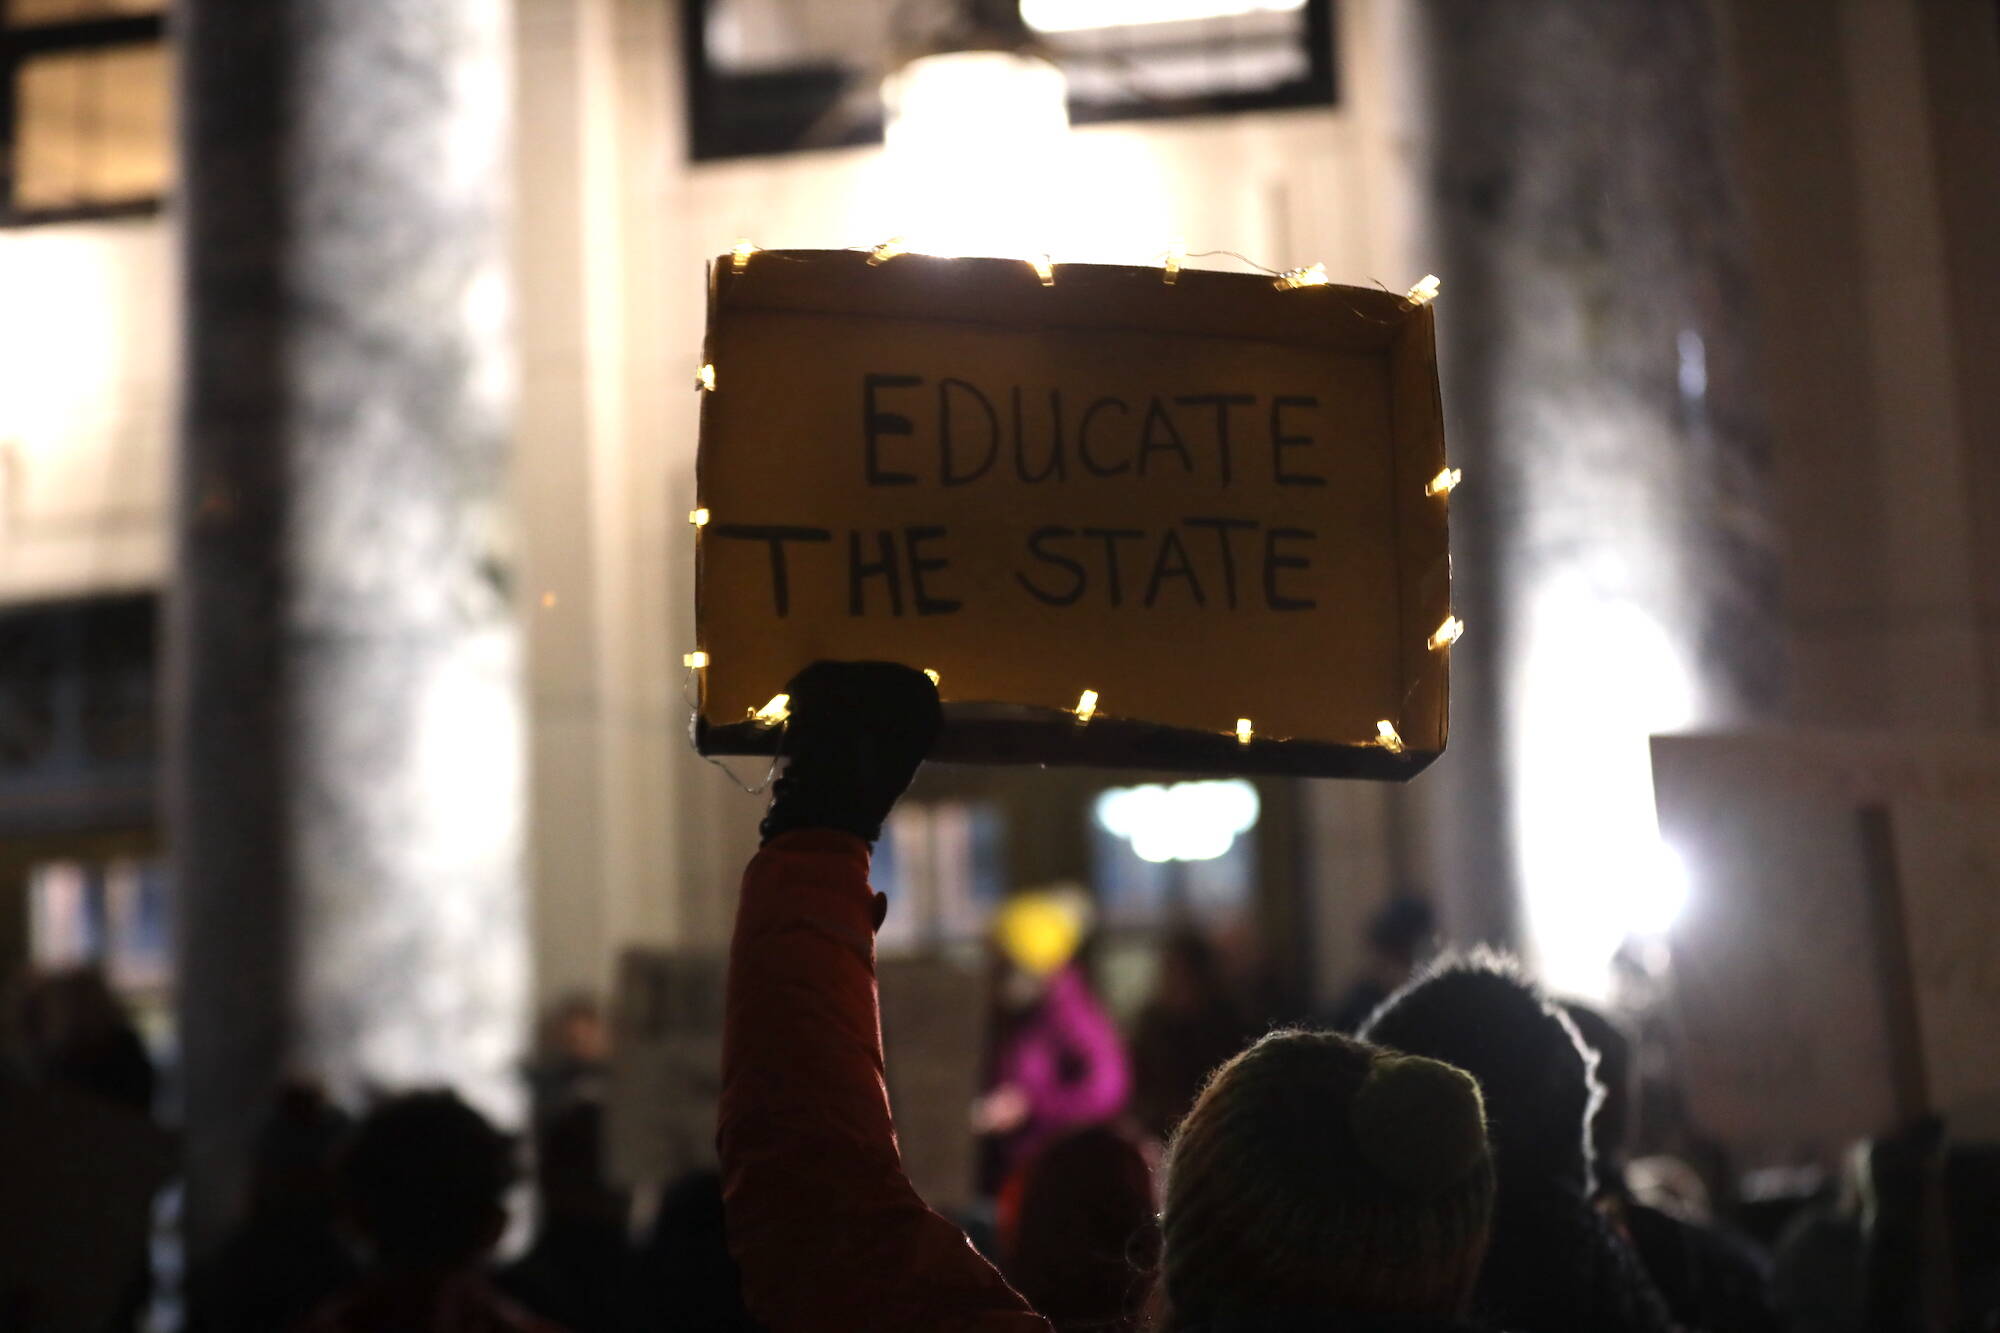 A protester holds a sign advocating for an increase in the state’s base student allocation during a rally at the steps of the Alaska State Capitol Monday evening. (Clarise Larson / Juneau Empire)